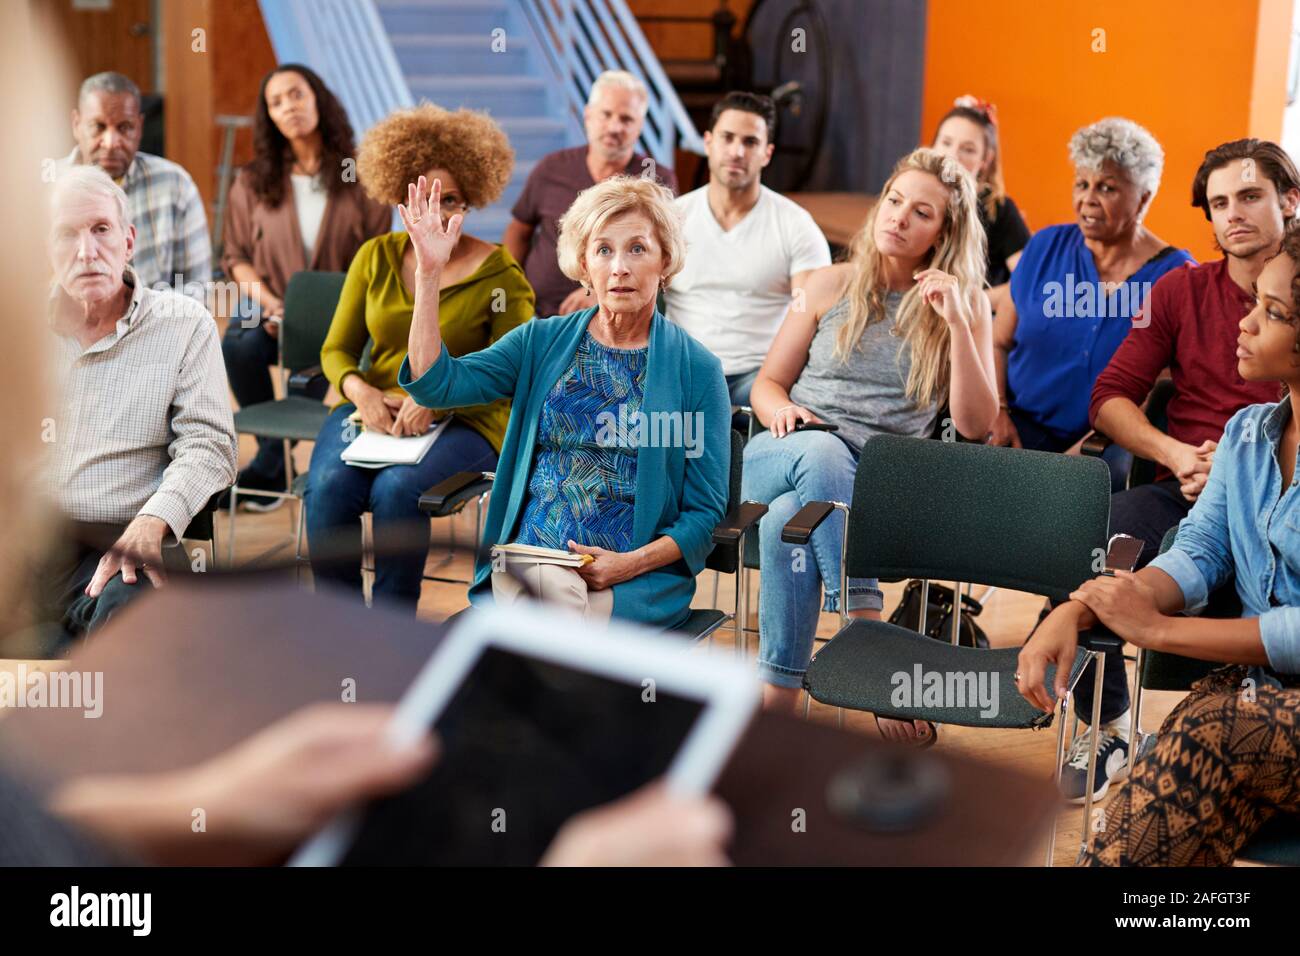 Woman Asking Question At Group Neighborhood Meeting In Community Center Stock Photo